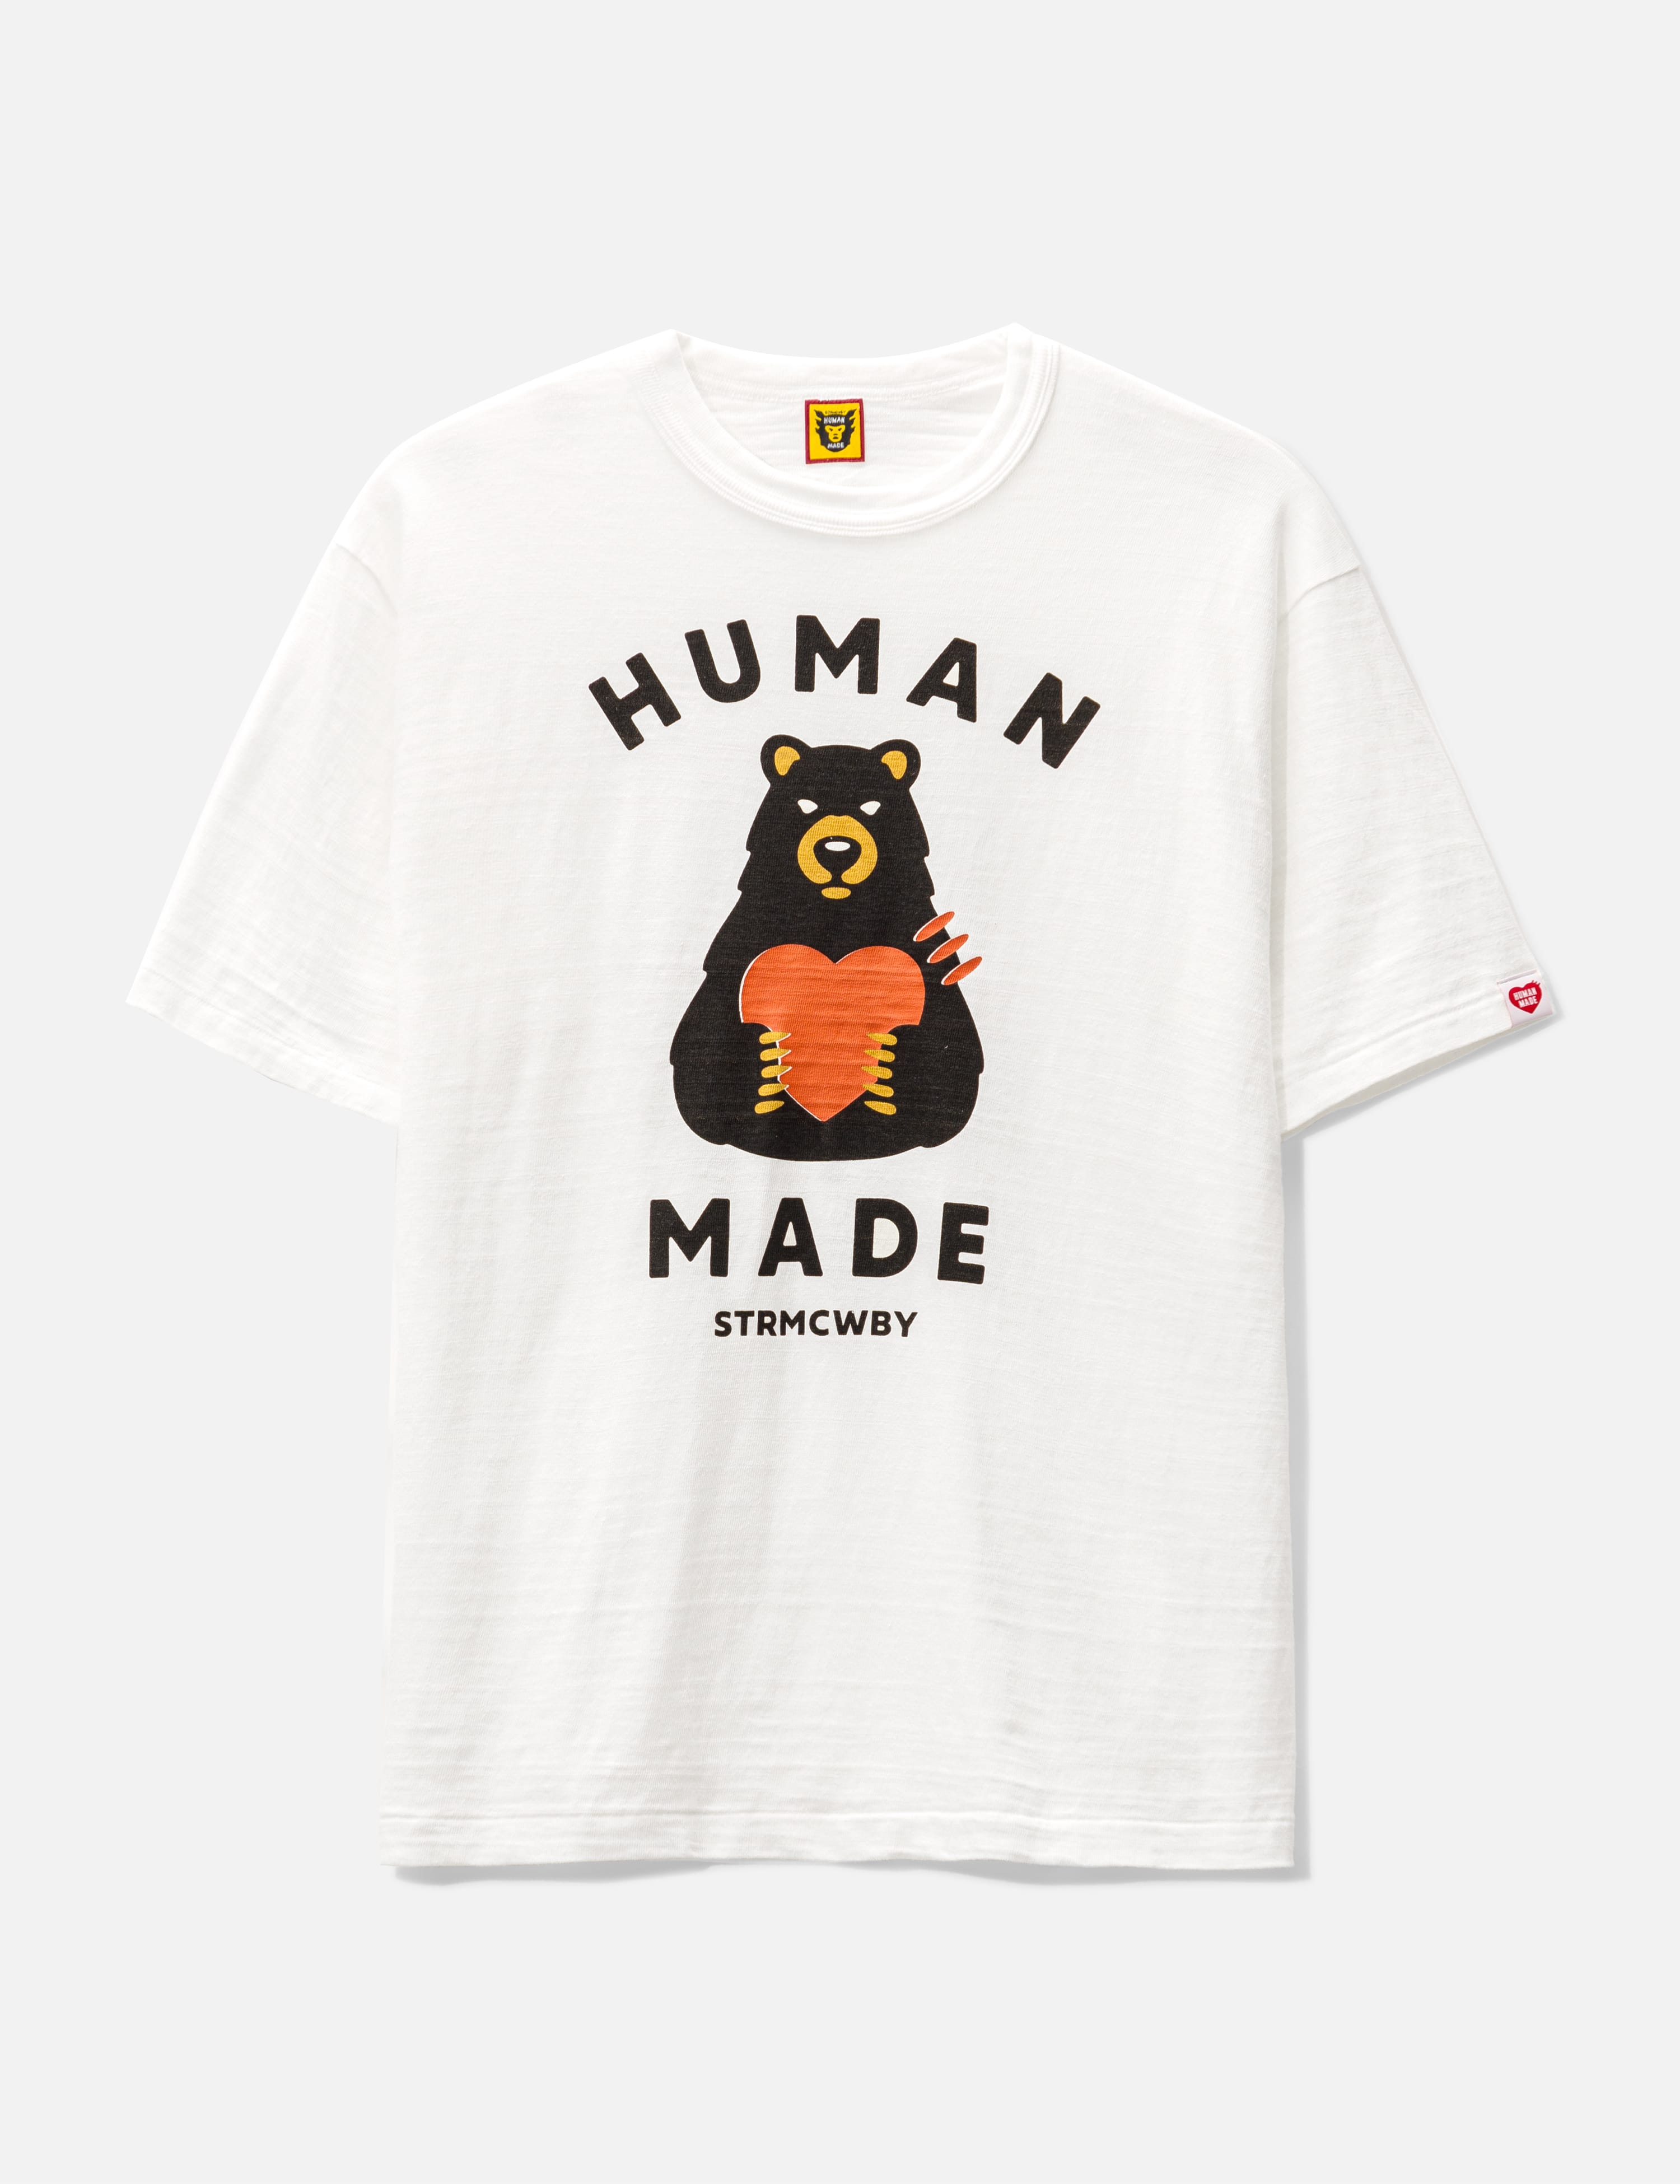 Human Made | HBX - Globally Curated Fashion and Lifestyle by Hypebeast